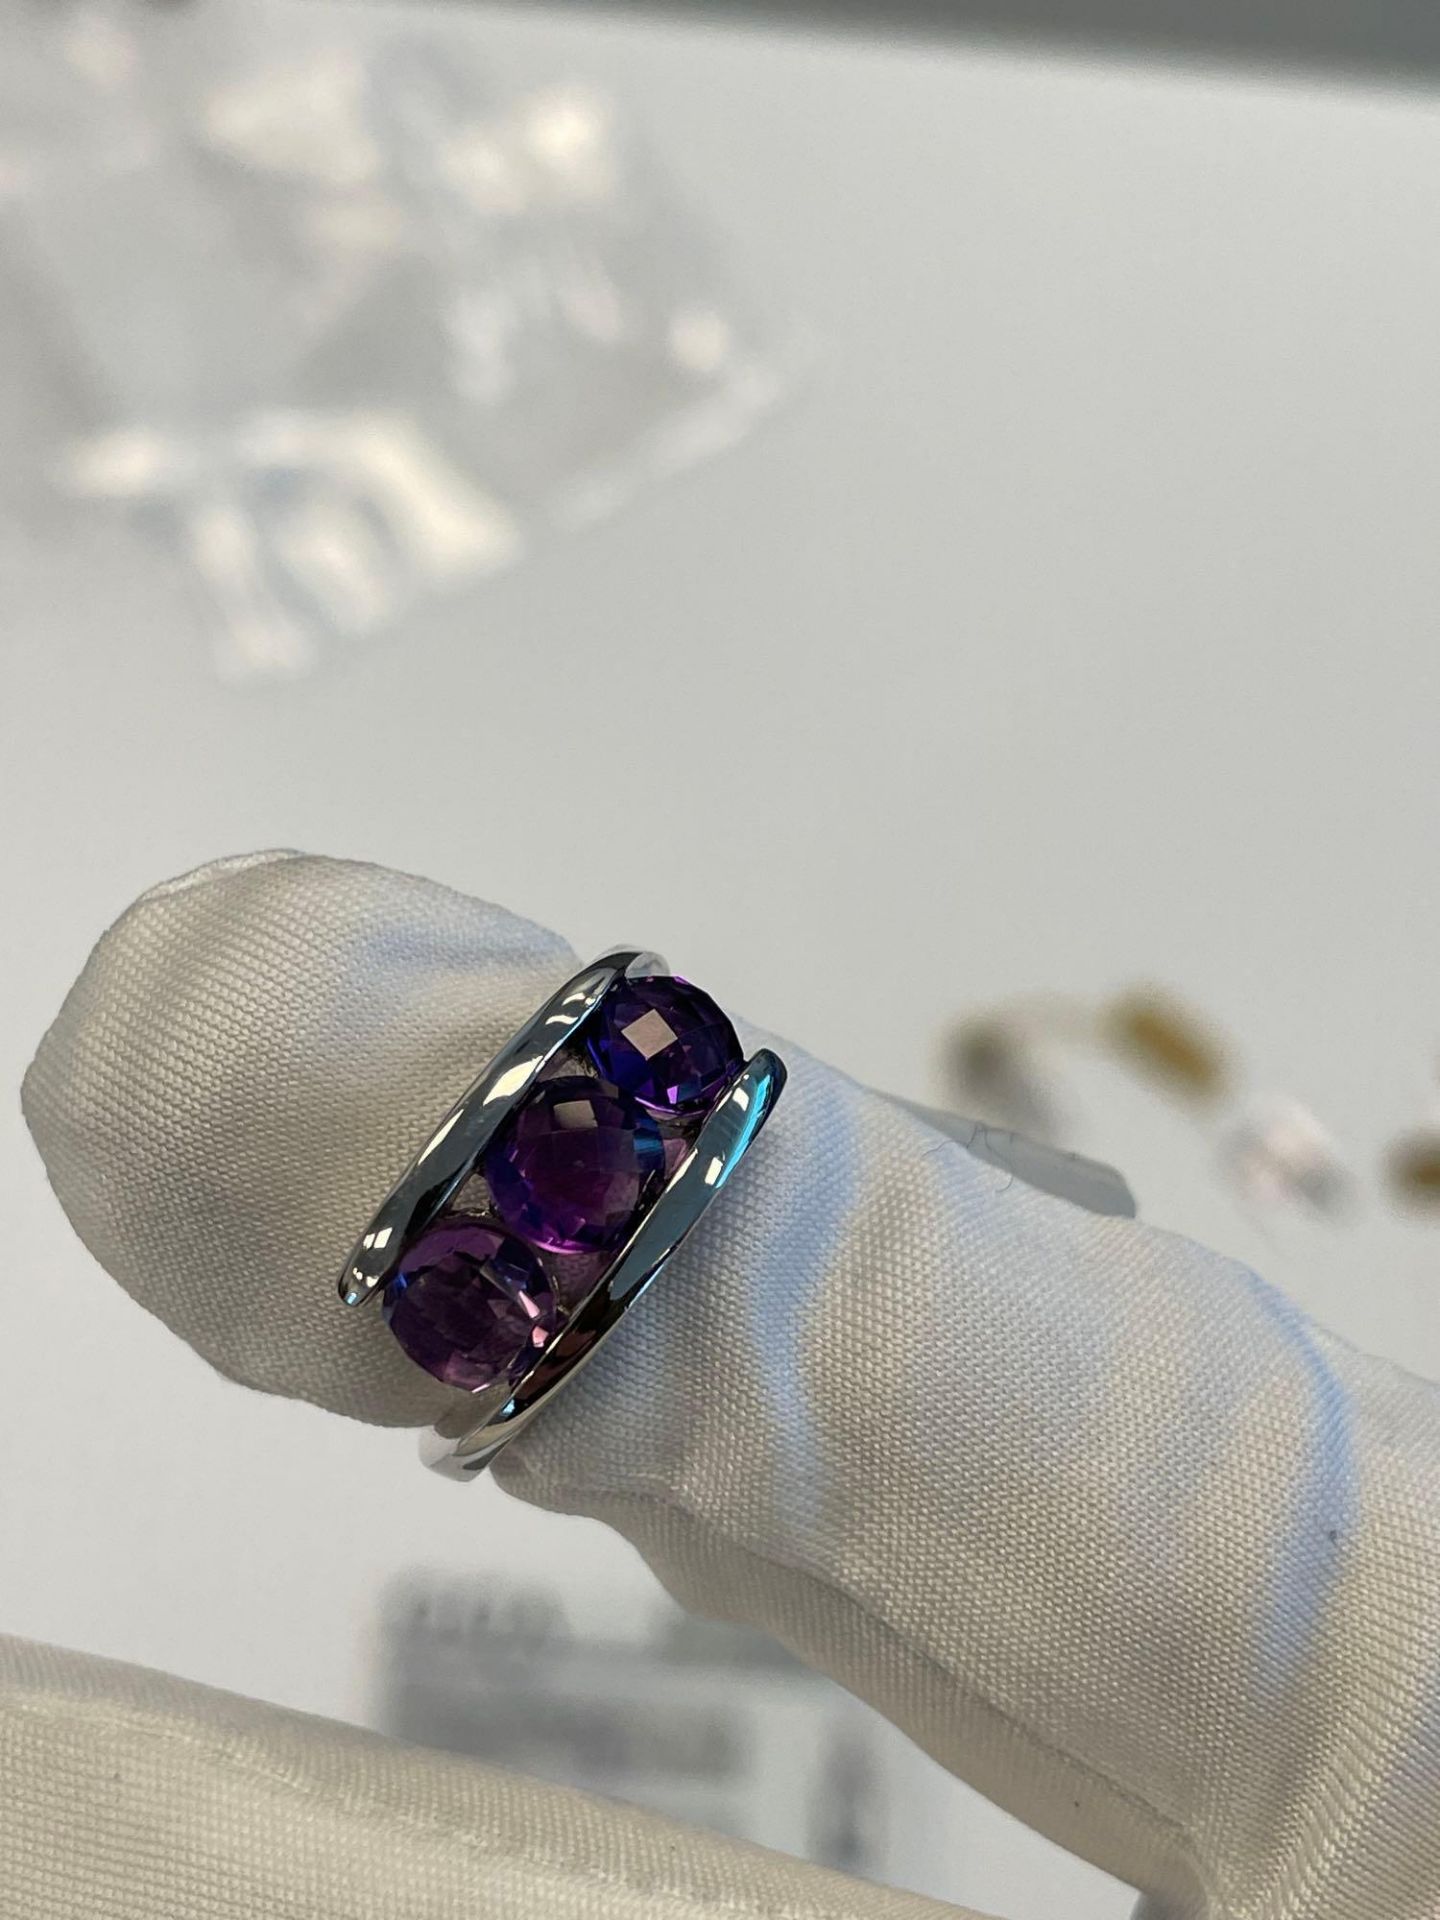 misc gemstones and rings - Image 9 of 9